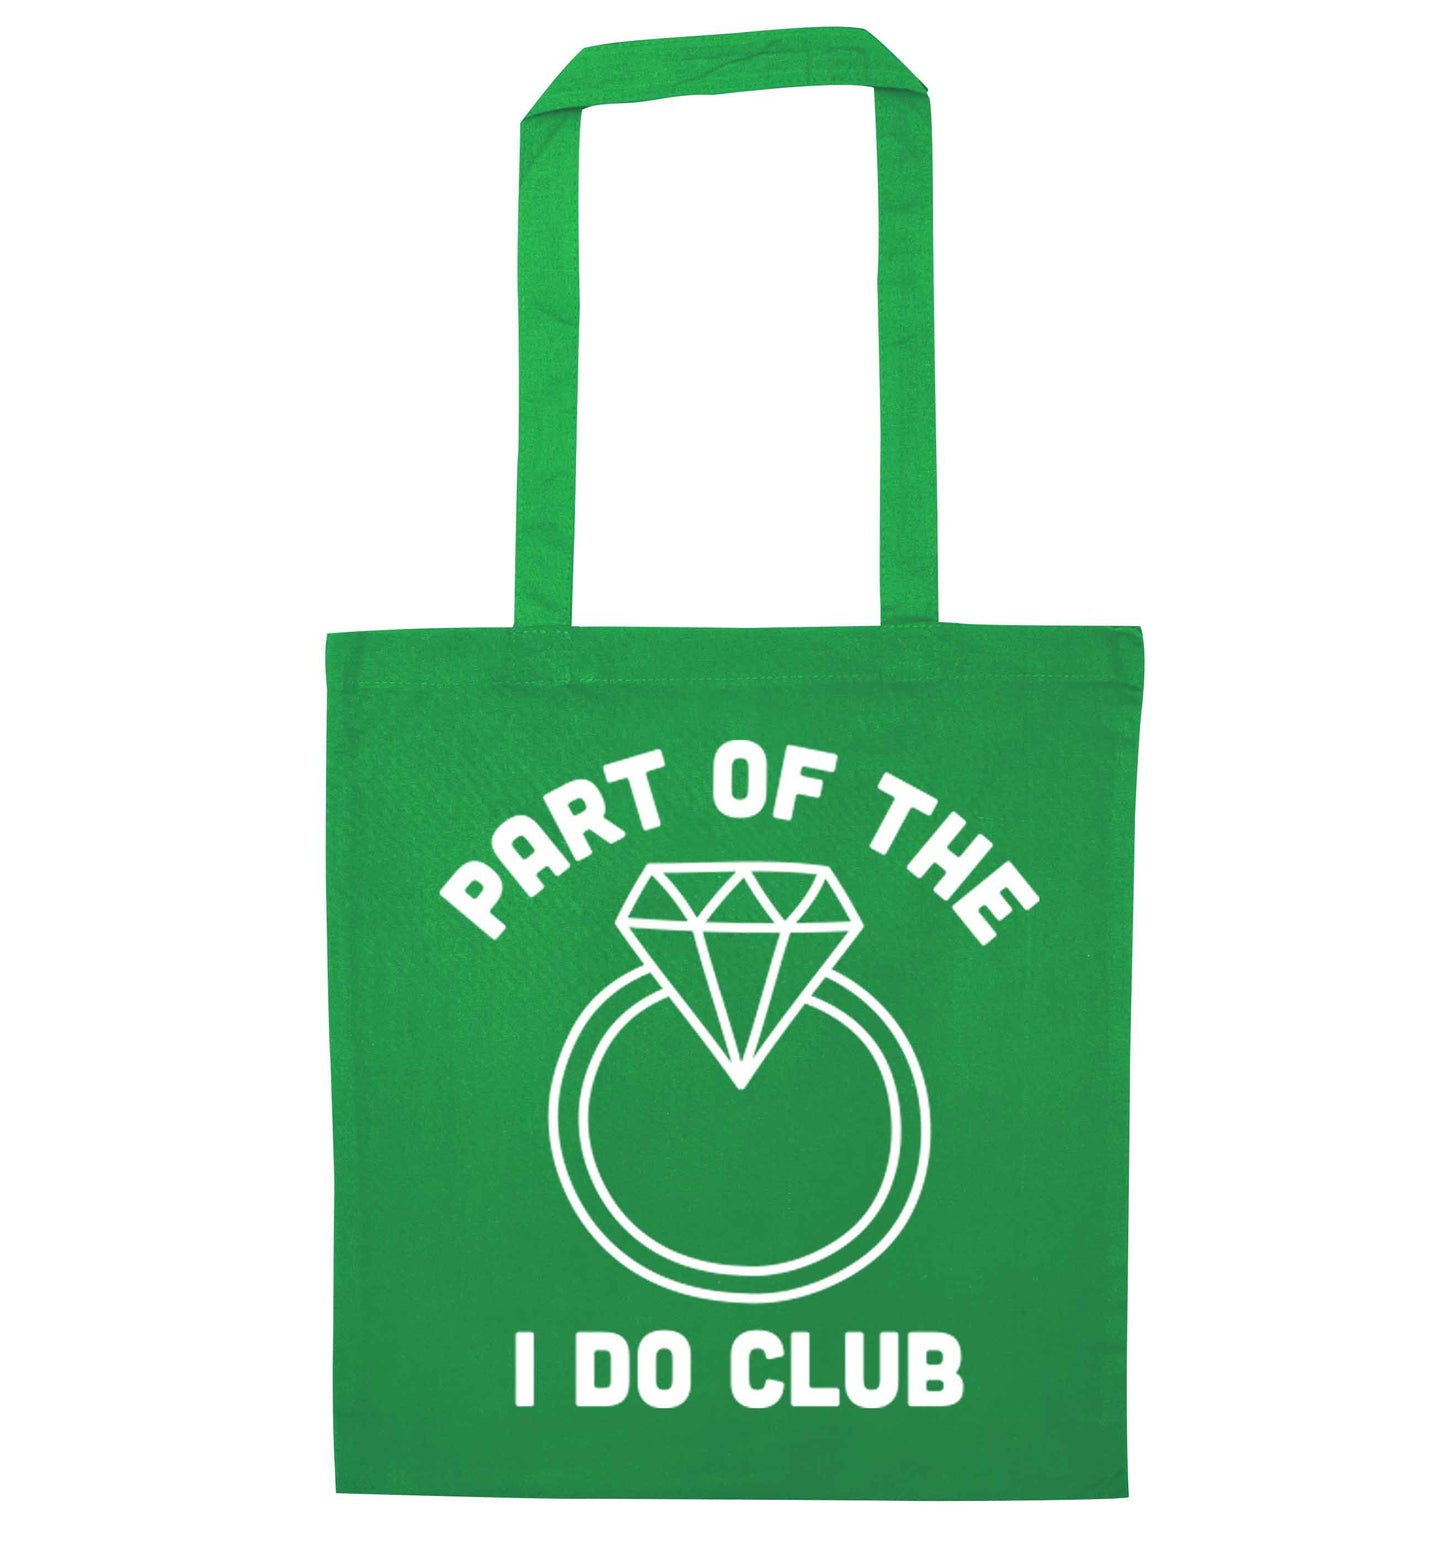 Part of the I do club green tote bag